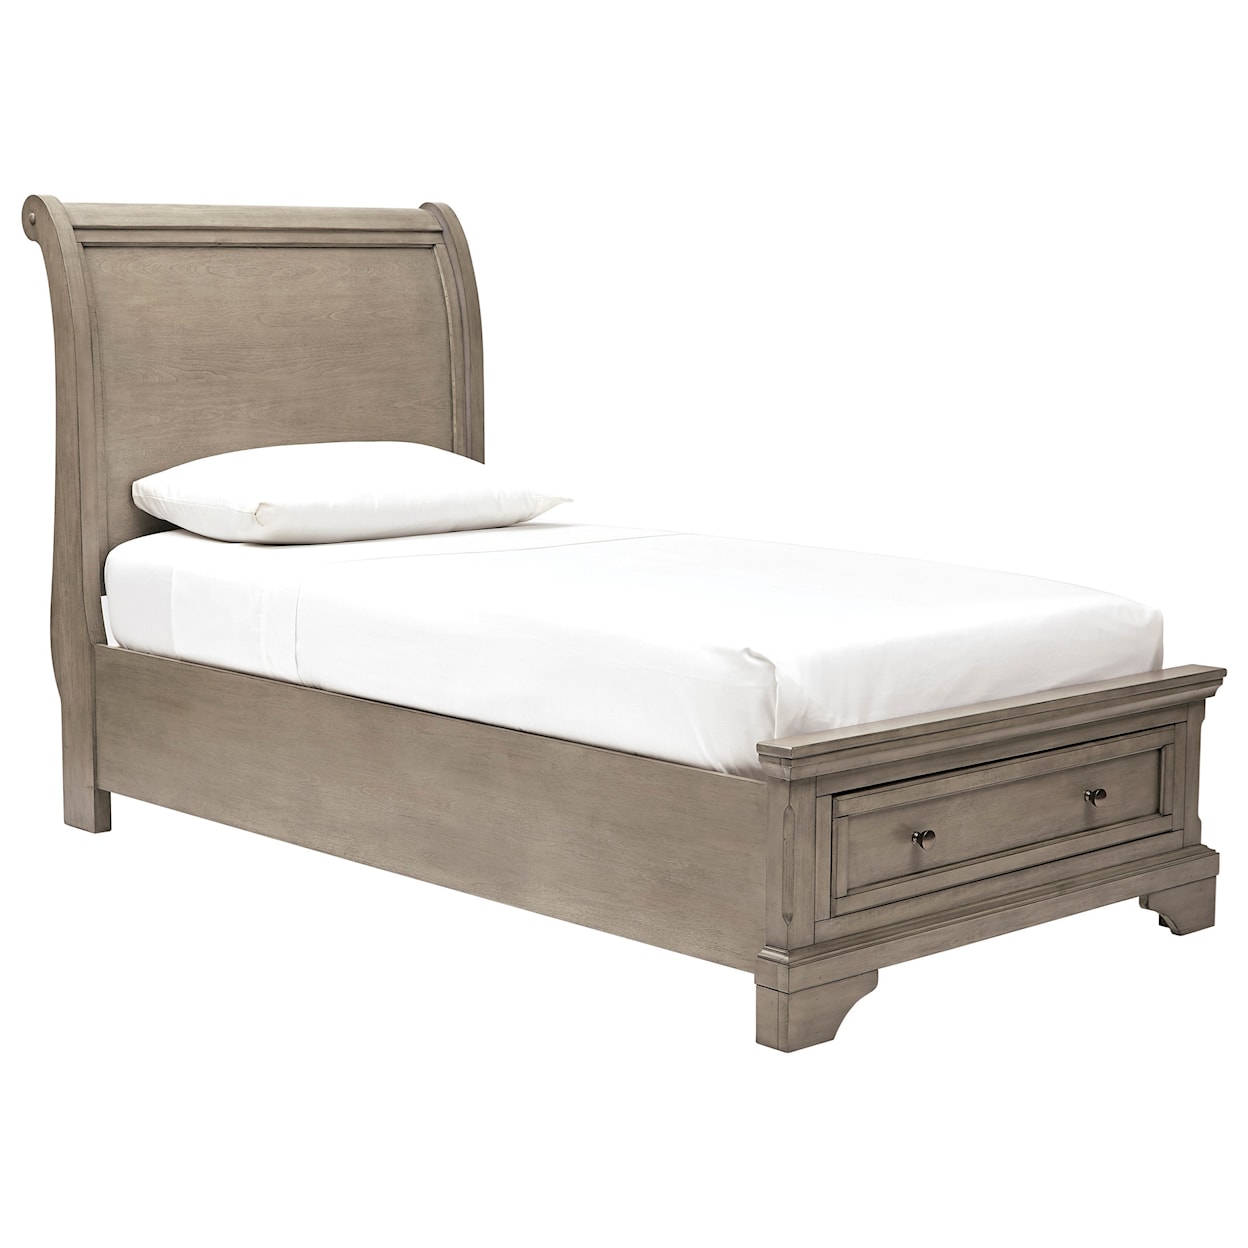 Signature Design by Ashley Lettner Twin Sleigh Storage Bed